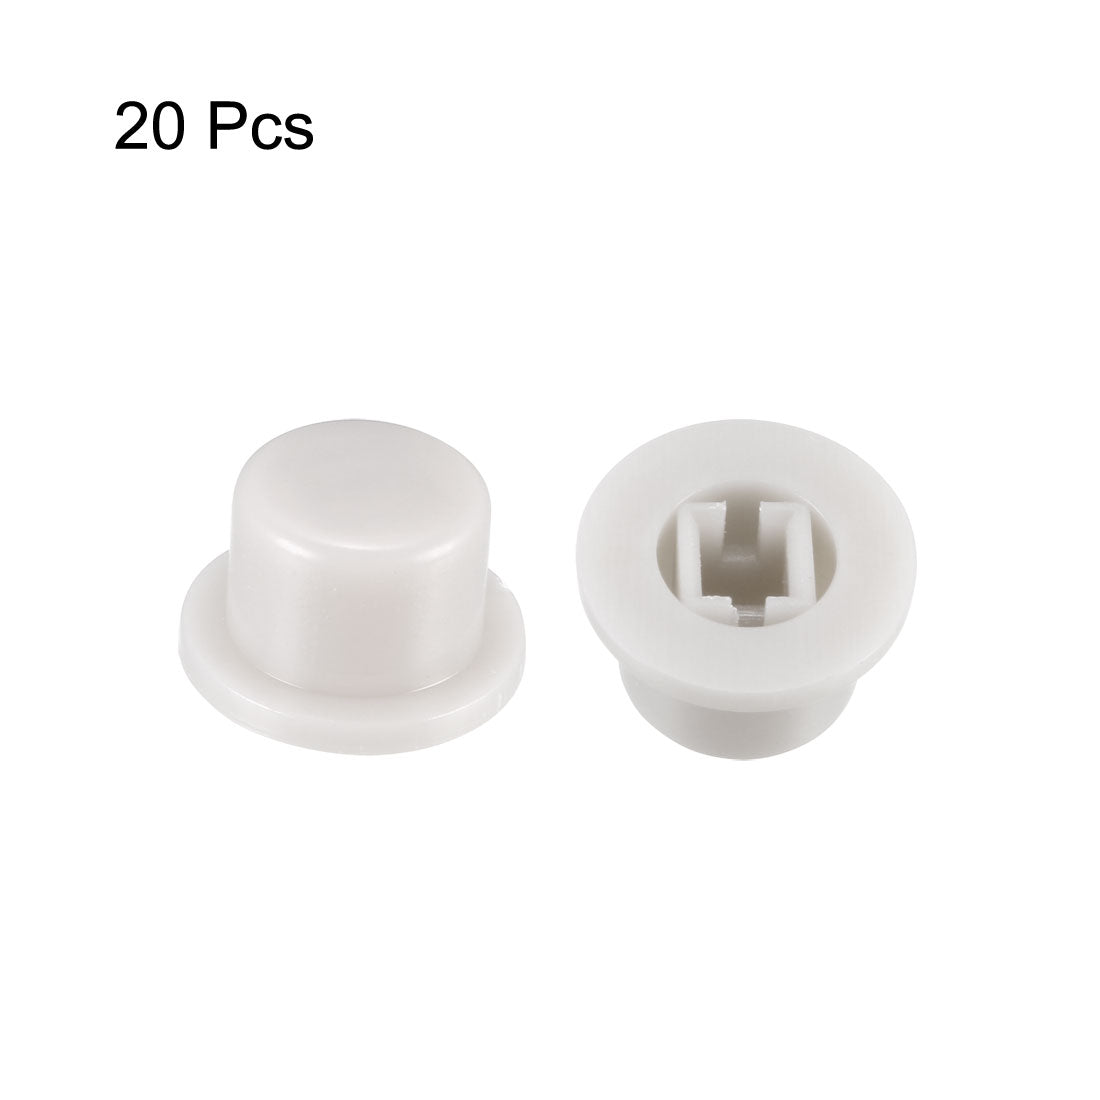 uxcell Uxcell 20Pcs Plastic 9.3x5.6mm Pushbutton Tactile Switch Caps Cover Keycaps Grey for 6x6x7.3mm Tact Switch